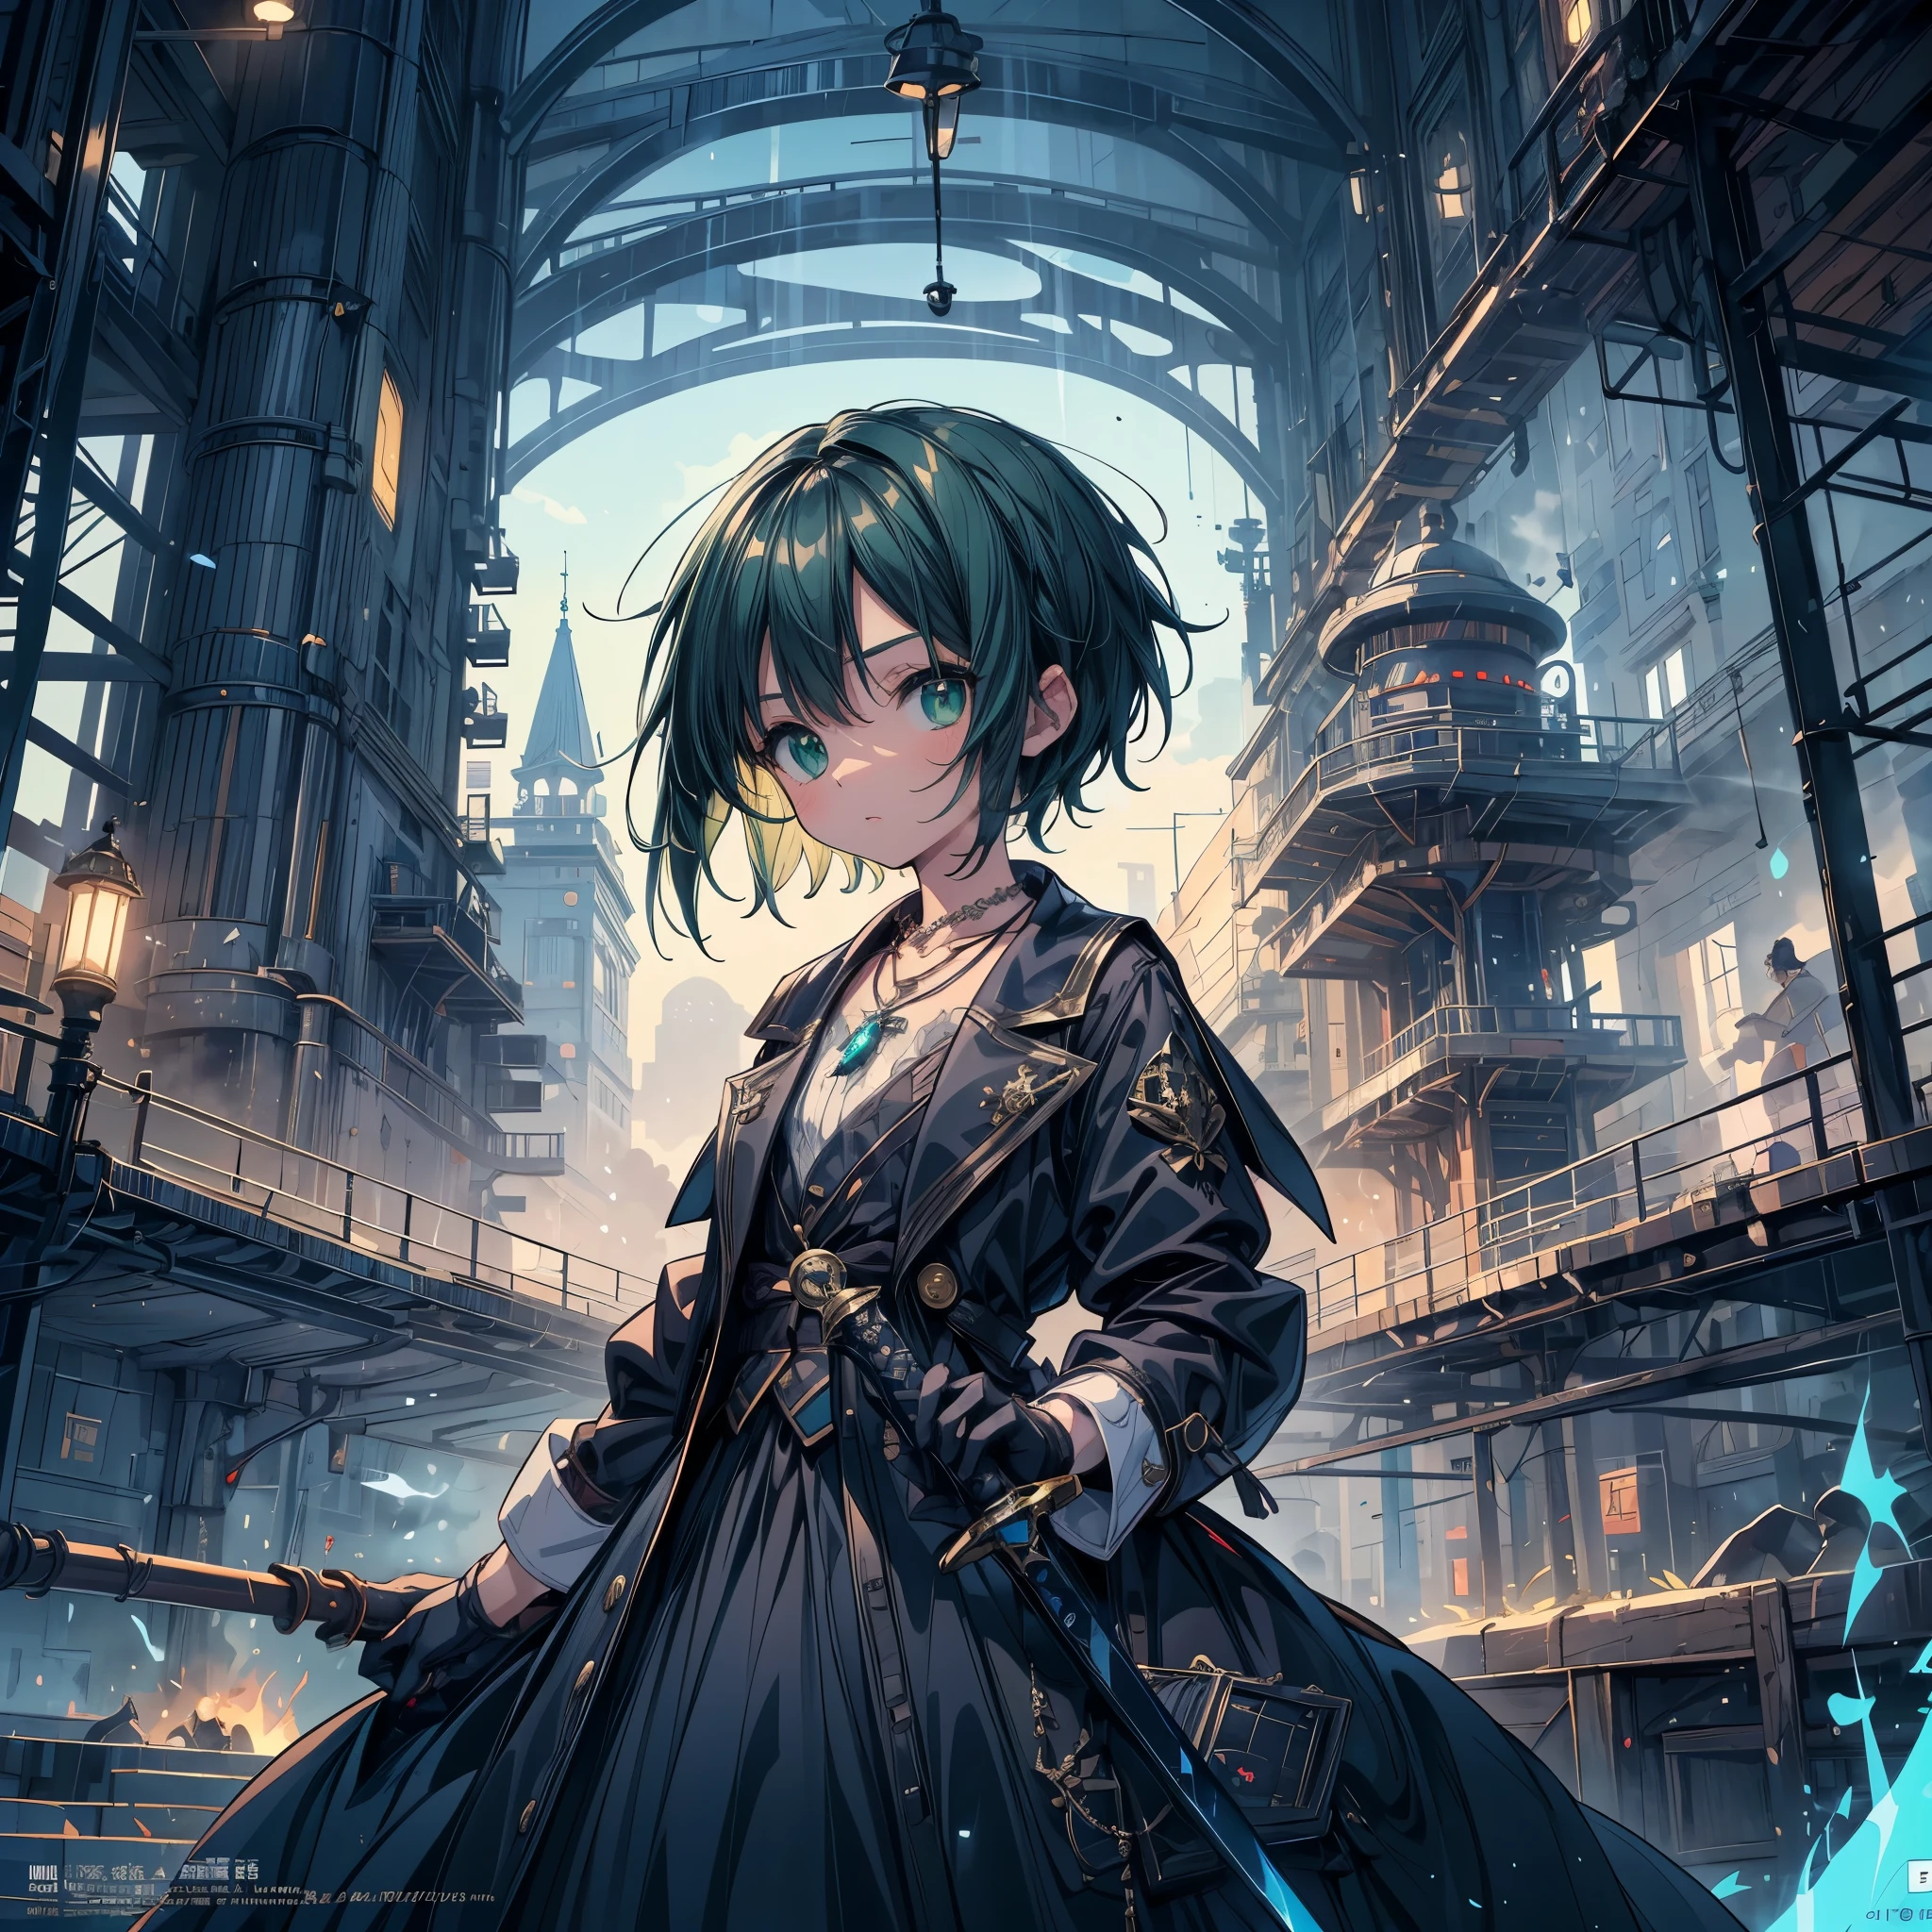 (best quality, high quality, masterpiece:1.2), (Anime girl with luminous sword:1.3), (holding a high-tech sword made of sapphire:1.2), (1 person,Lolita,boyish, , 13 years old:1.3), serious, solo, Androgynous charm, (Very short hair), ((Black Hair)), small and soft breasts, Slender body, Small Ass, Small green eyes, Detailed and beautiful eyes, Well-proportioned iris and pupil, Beautifully detailed lips, High resolution detailed hair, Perfect lighting, ((Light green necklace)), goggles around neck, Light green tie, Luminous Sapphire, Blue Flame, (Steampunk), ((Steam Engineer)), Putting on gloves, steampunk cityscape, gear, pipe, (Steam spewing out from pipes:1.2), Fantasy, Fisheye, Digital anime art,Anime-style illustrations,Anime illustration